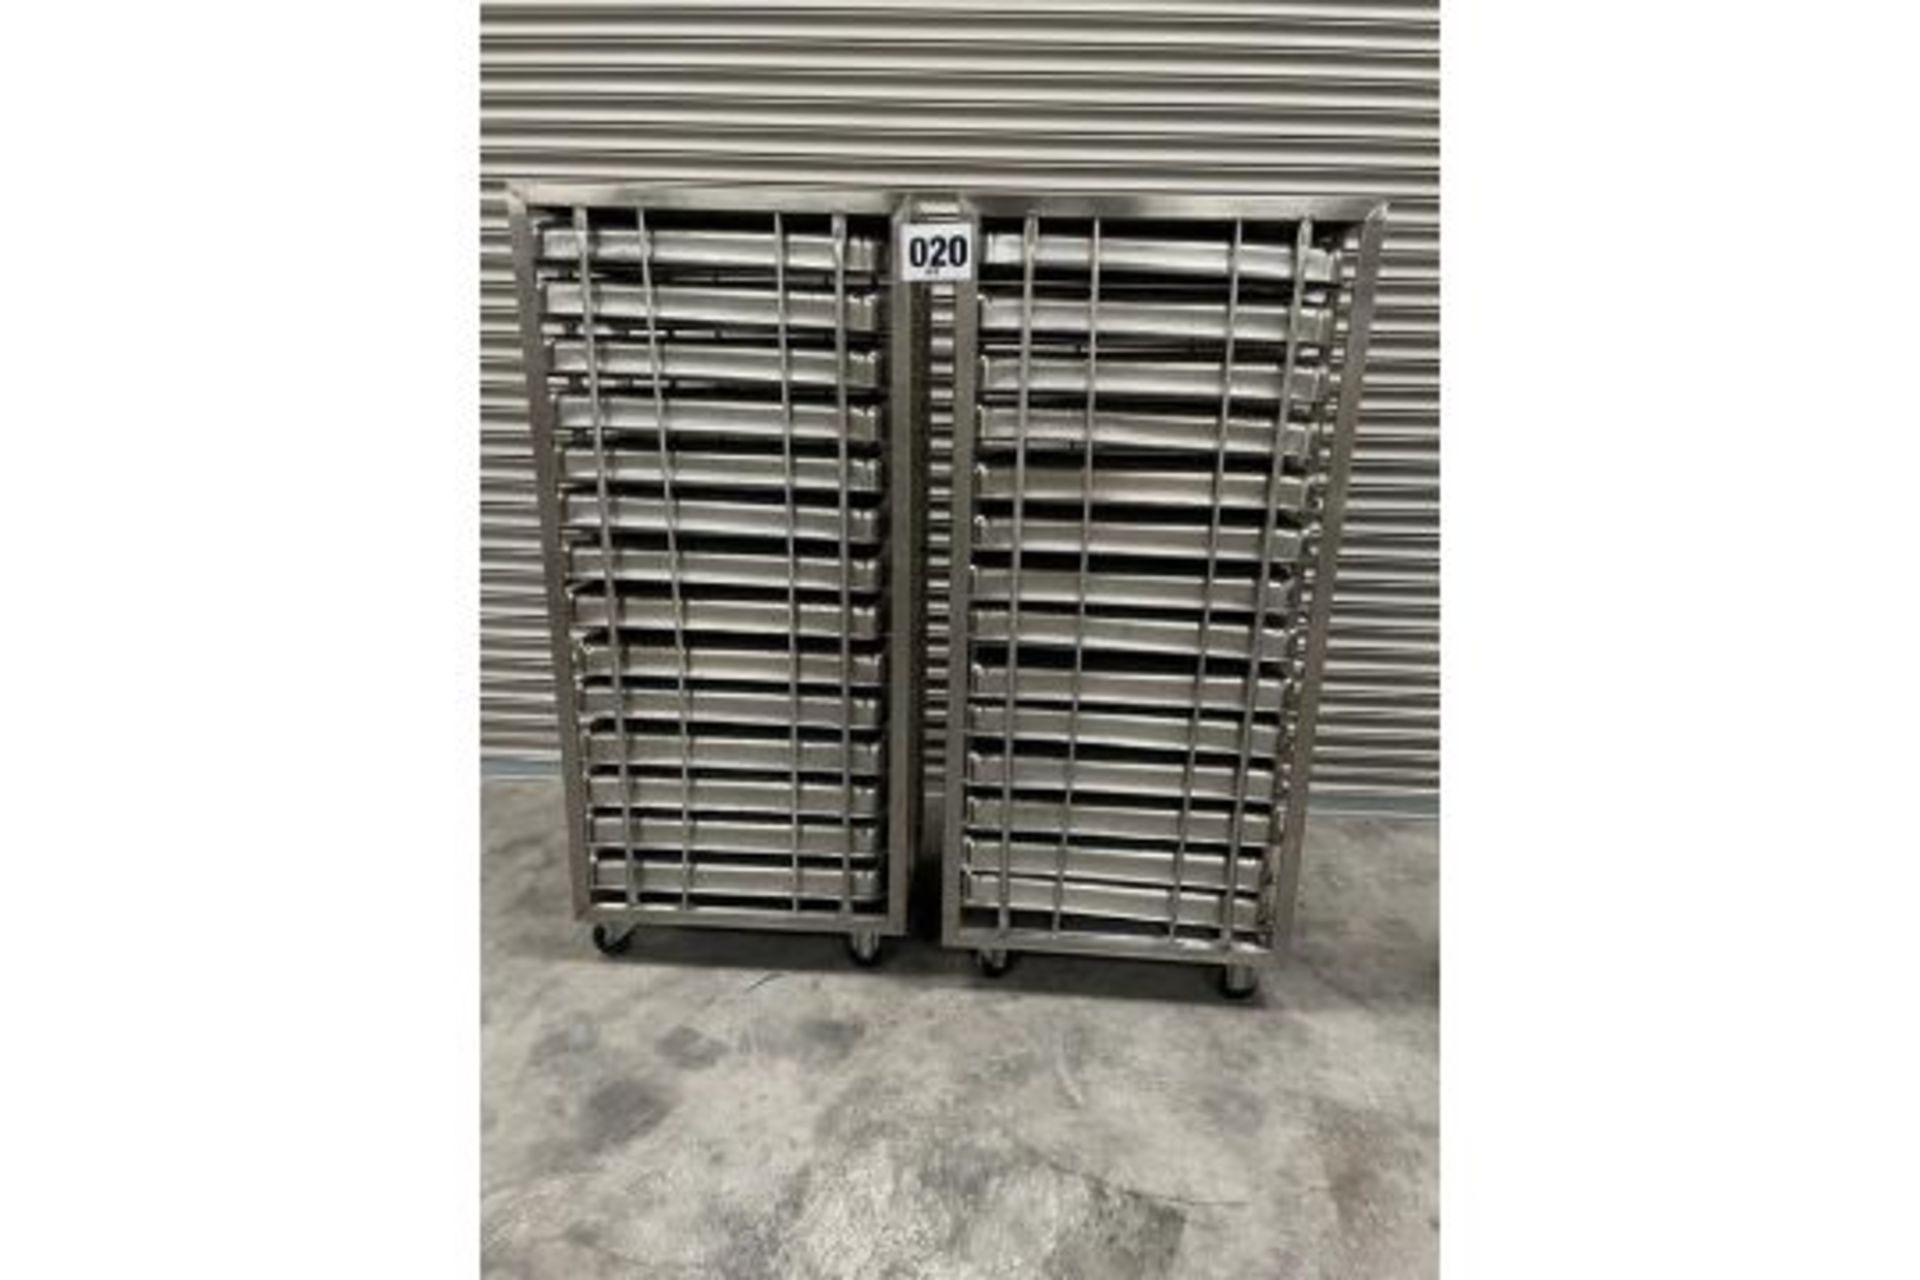 2 X UNITECH S/S RACKS COMPLETE WITH 14 GASTRO TRAYS IN EACH RACK